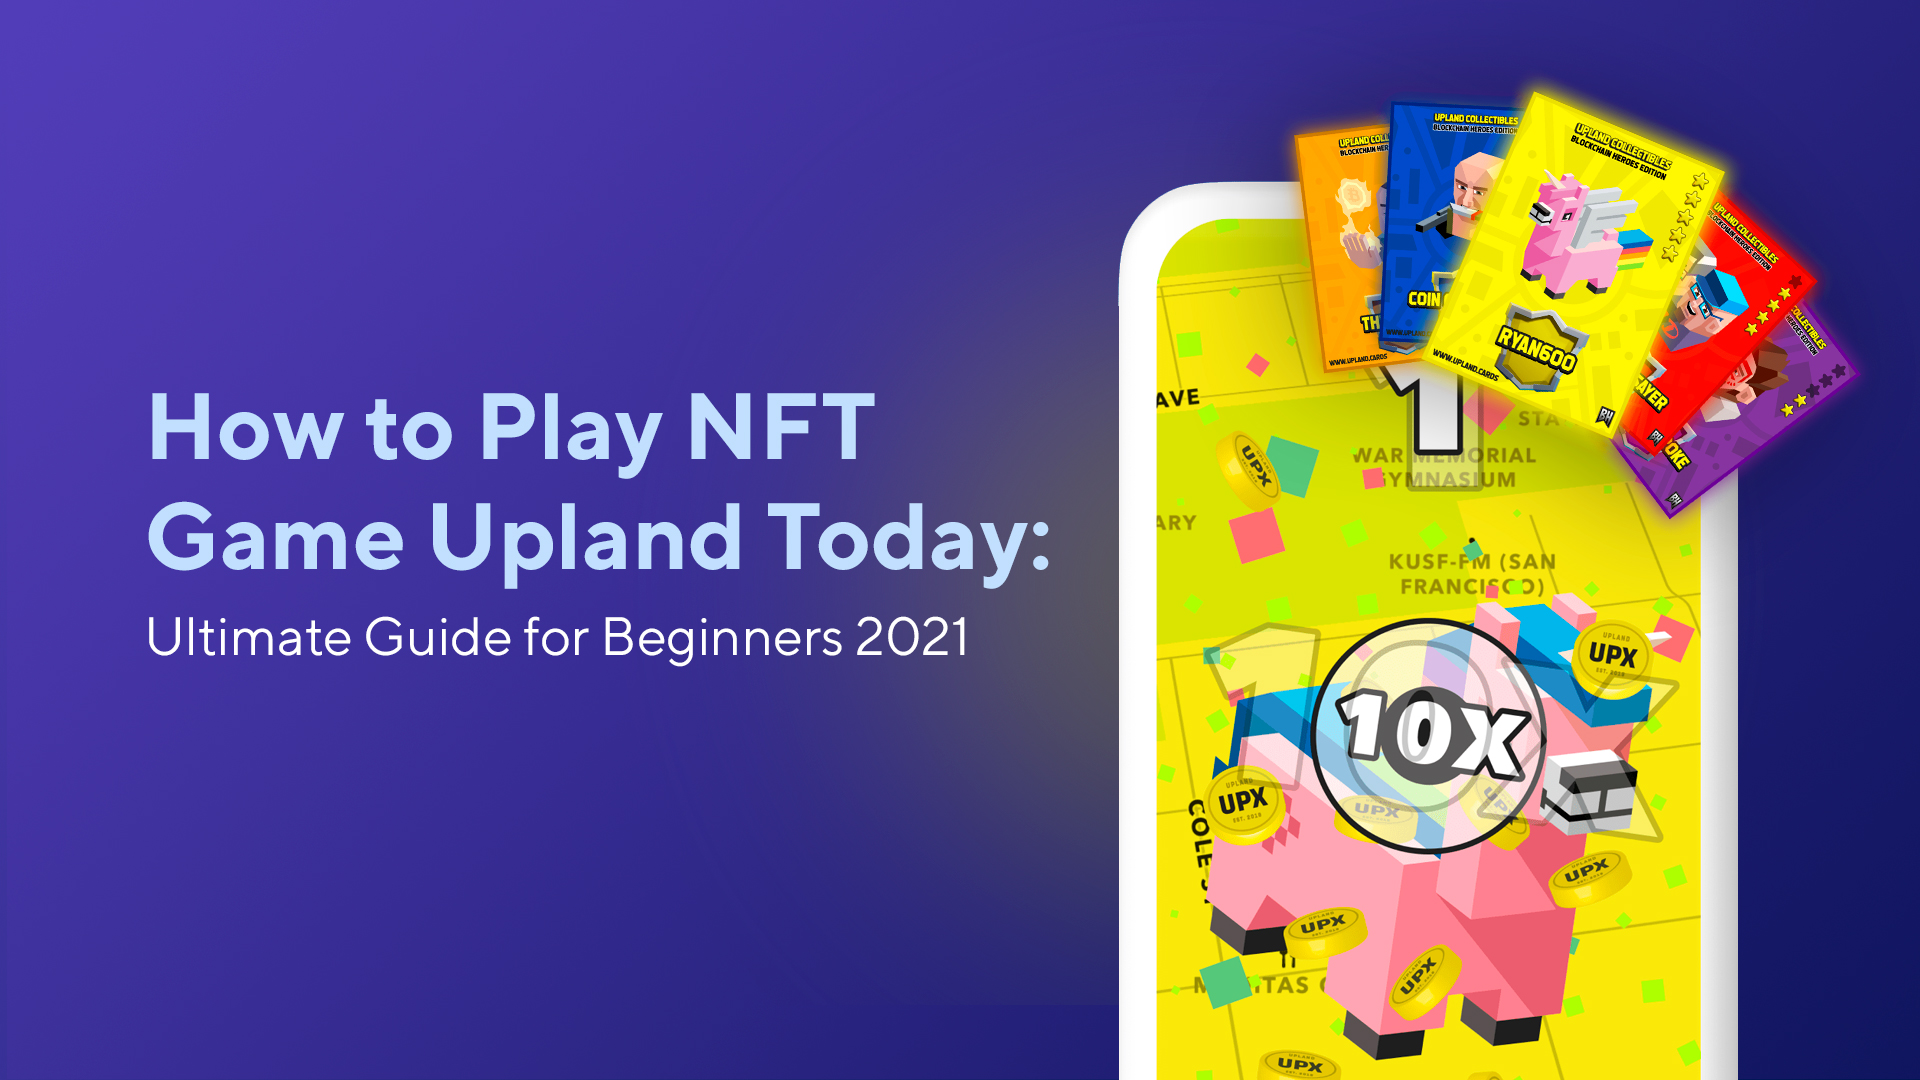 How to Play NFT Game Upland Today: Ultimate Guide for Beginners 2021